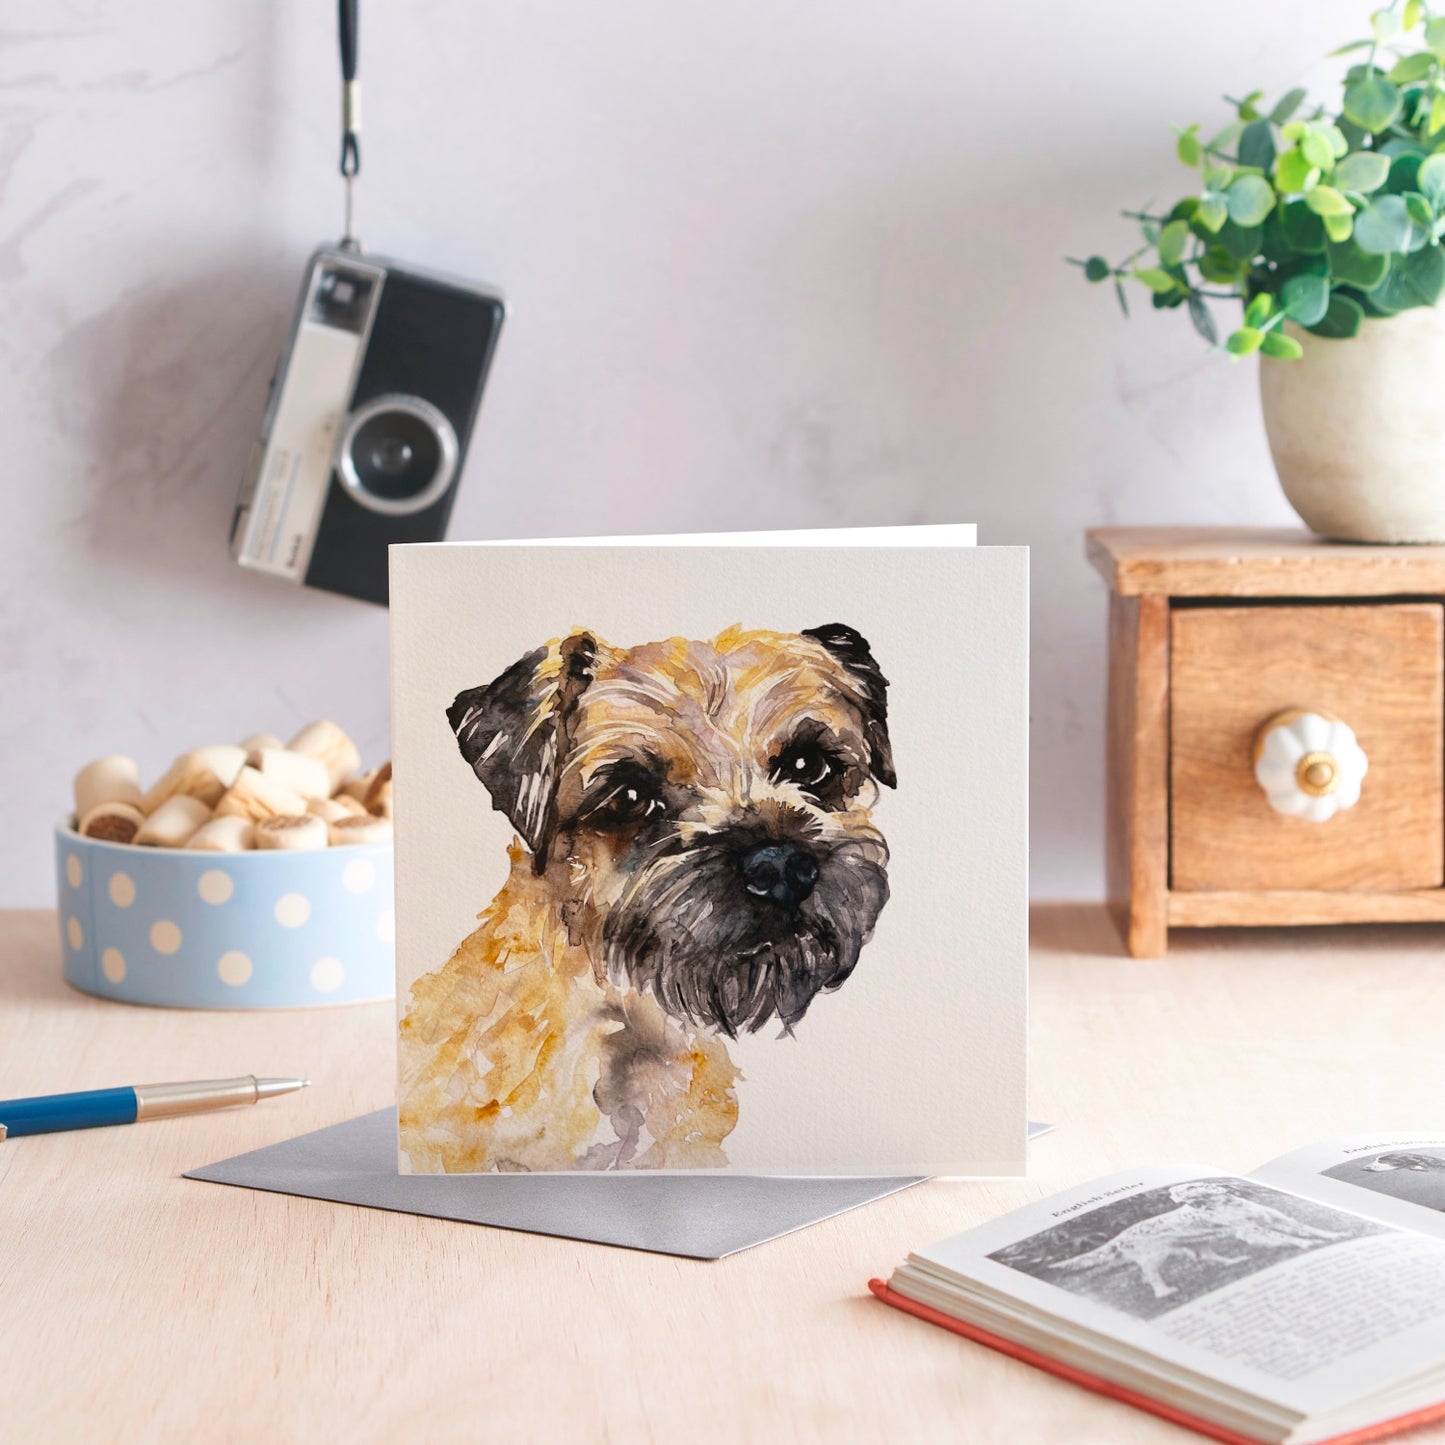 Mungo the Border Terrier Greeting Card  - Perfect for Birthdays, Special Occasions or Just Because